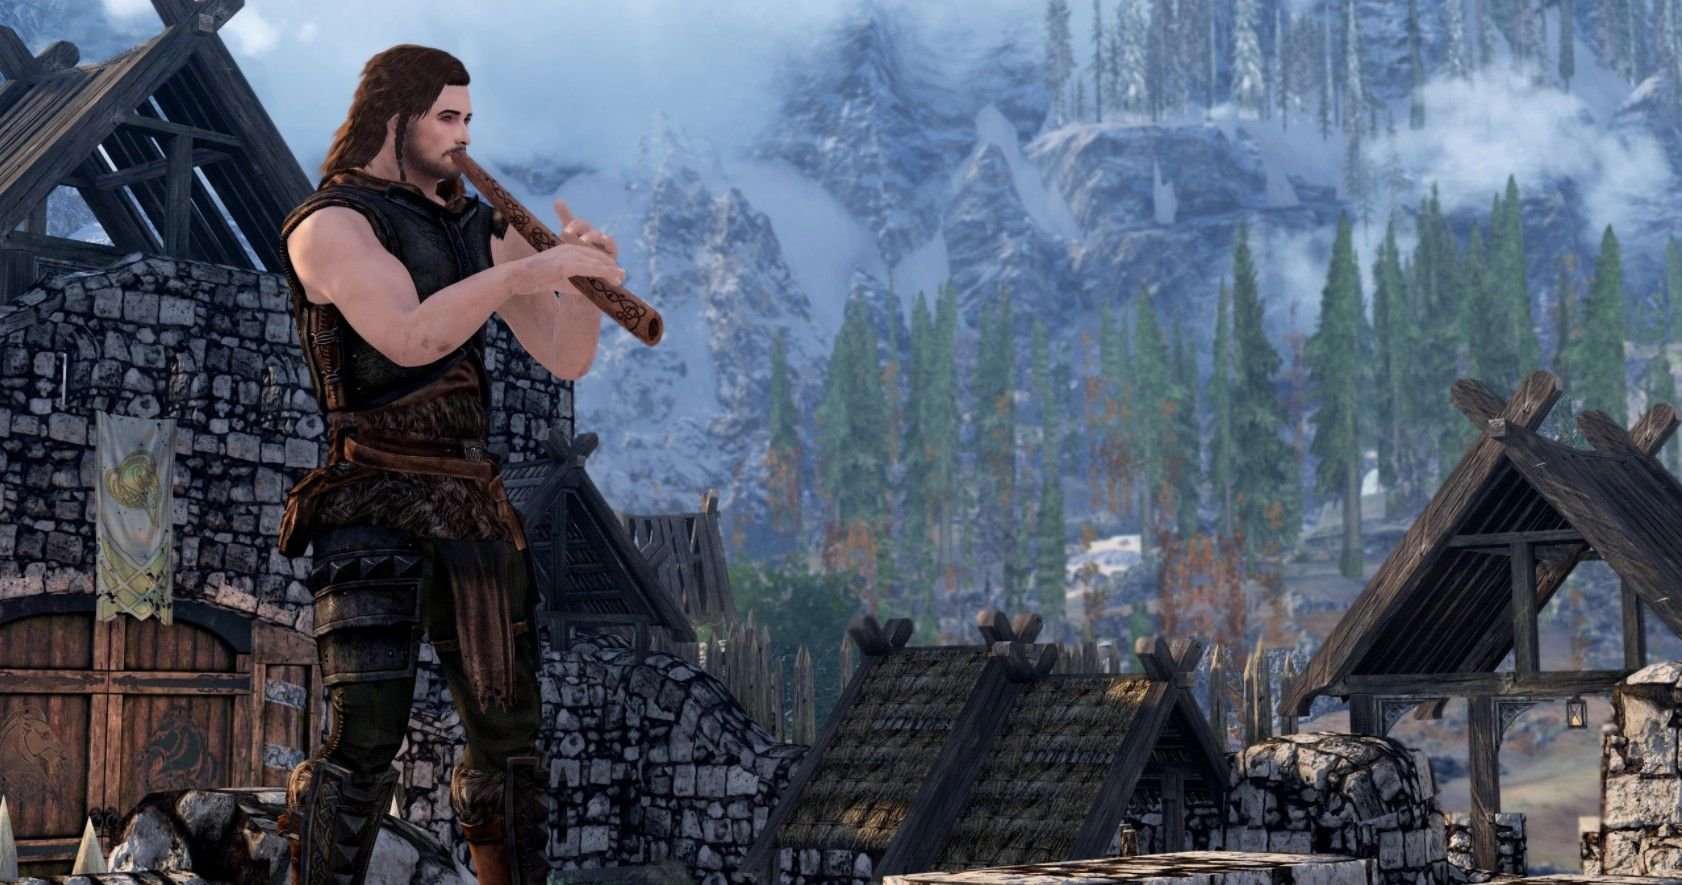 Become A Superstar Bard With The Skyrim's Got Talent Mod